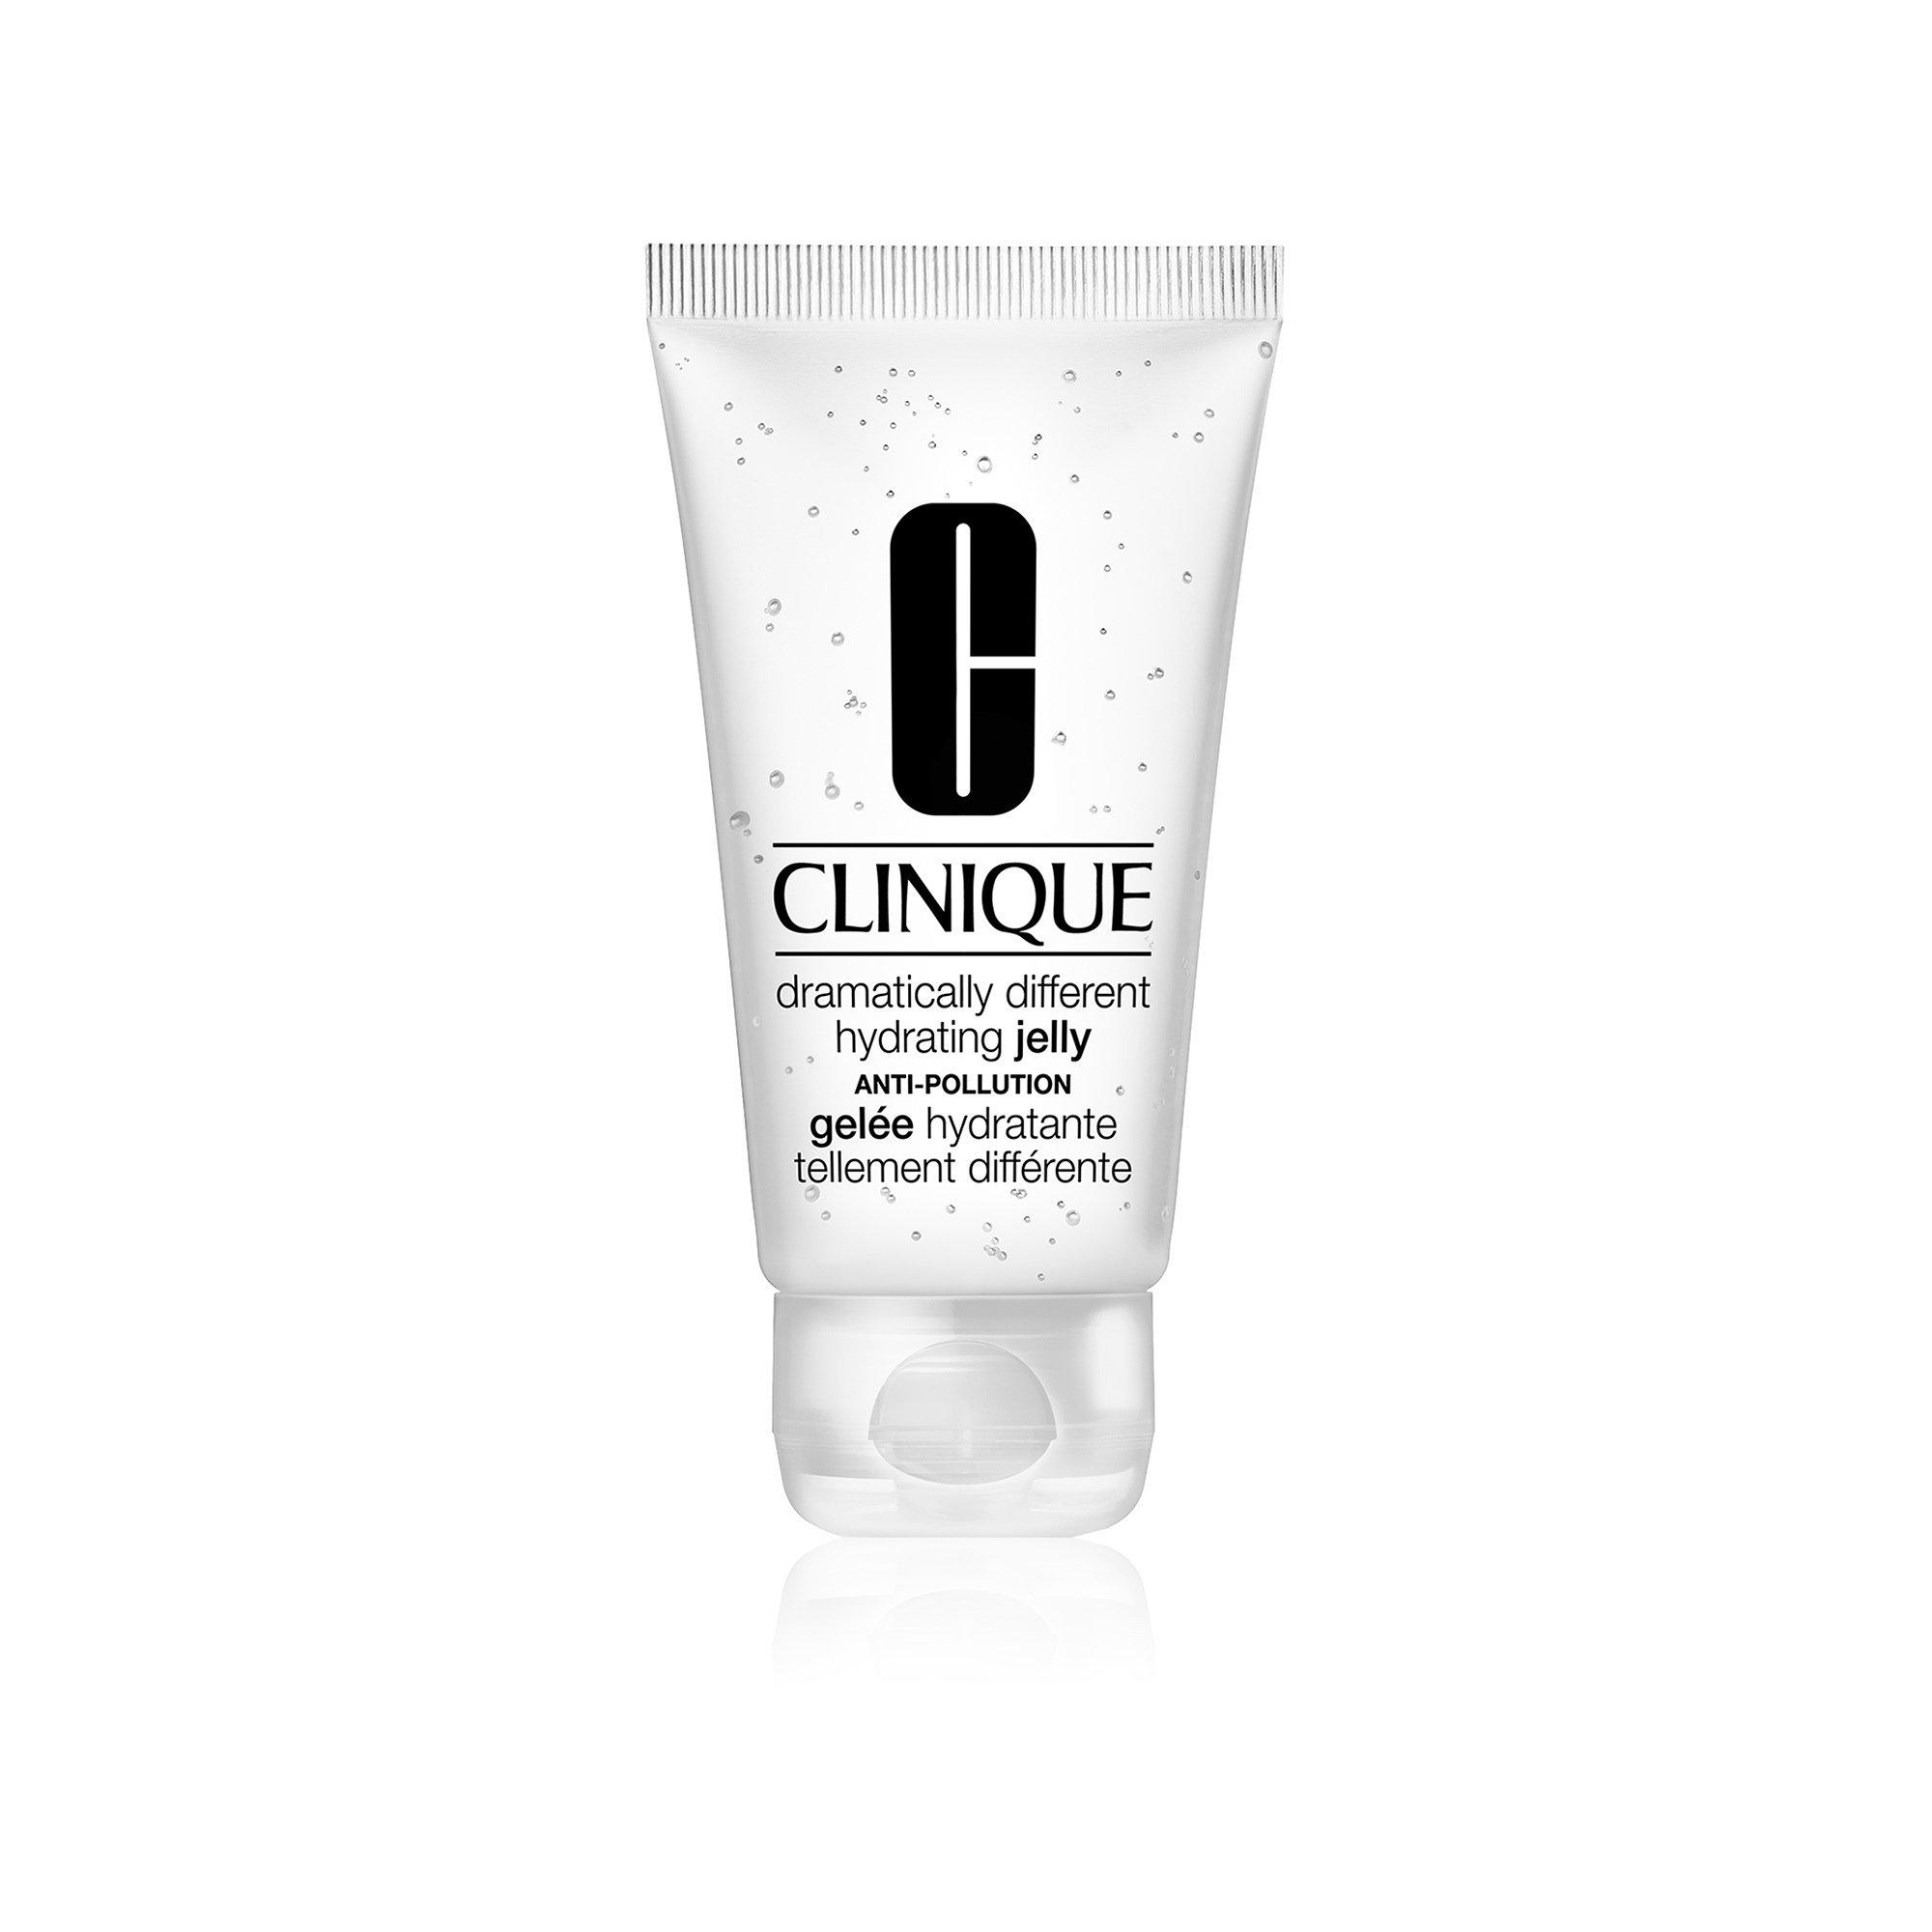 CLINIQUE Dramatically Different Hydrating Jelly Femme 50ml